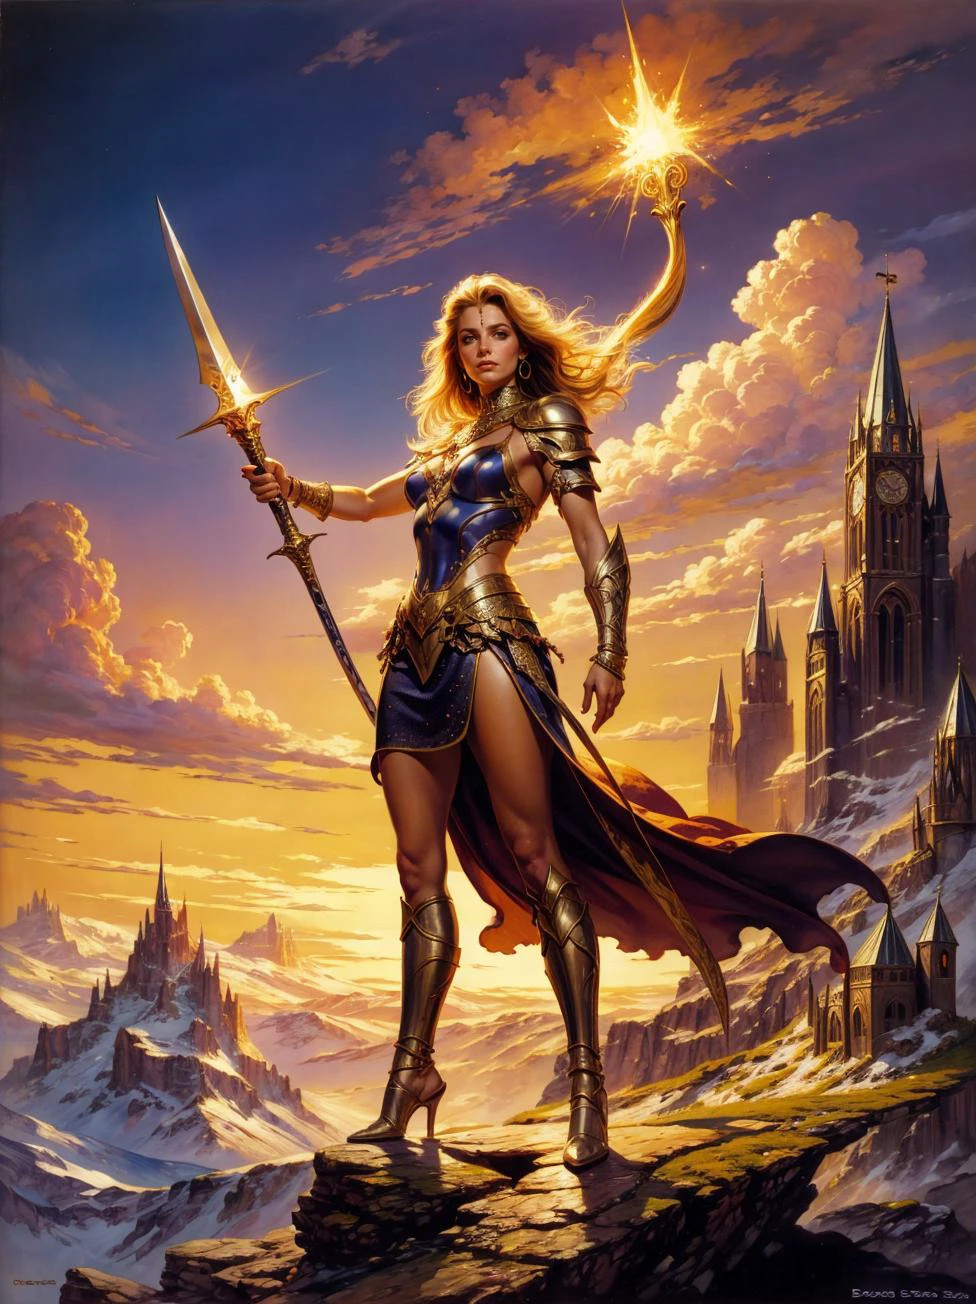 A fantasy painting by Boris Vallejo, of a beautiful warrior woman in chainmail, wielding a glowing sword, standing triumphantly on a mountain peak. astraa_bv